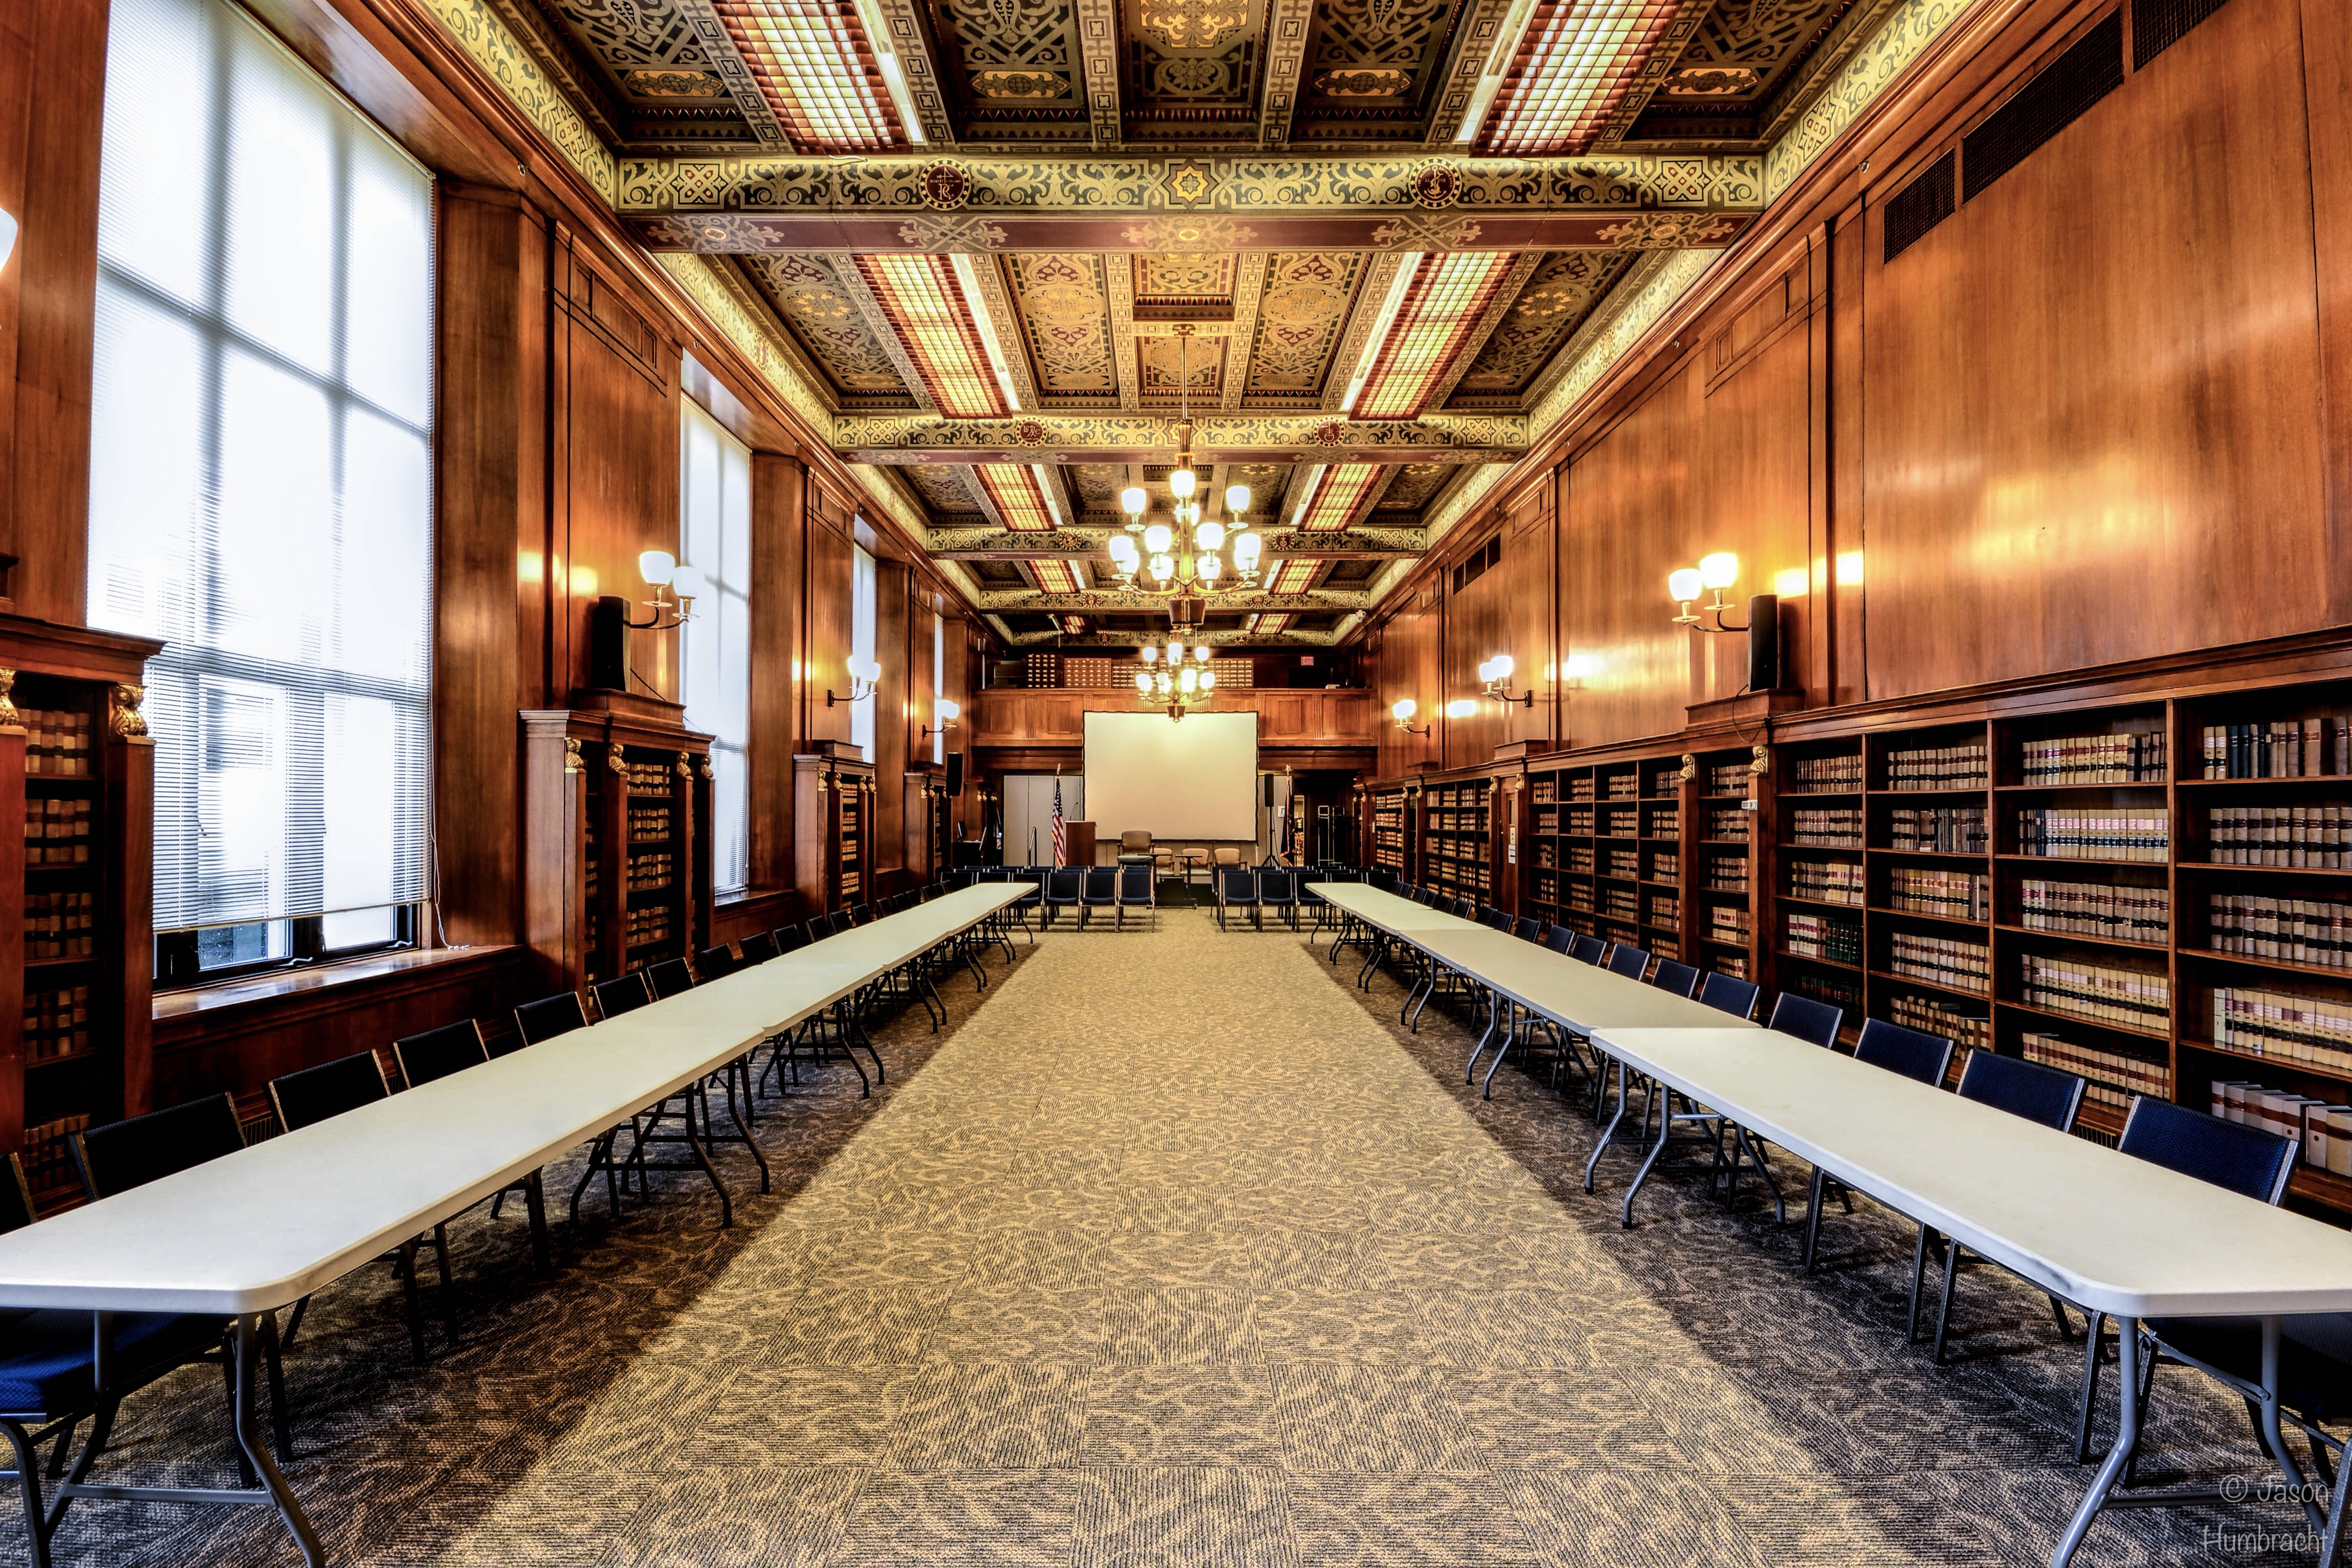 Indiana State Library | History Reference Room | Indiana Architecture | Indianapolis, Indiana | Image By Indiana Architectural Photographer Jason Humbracht